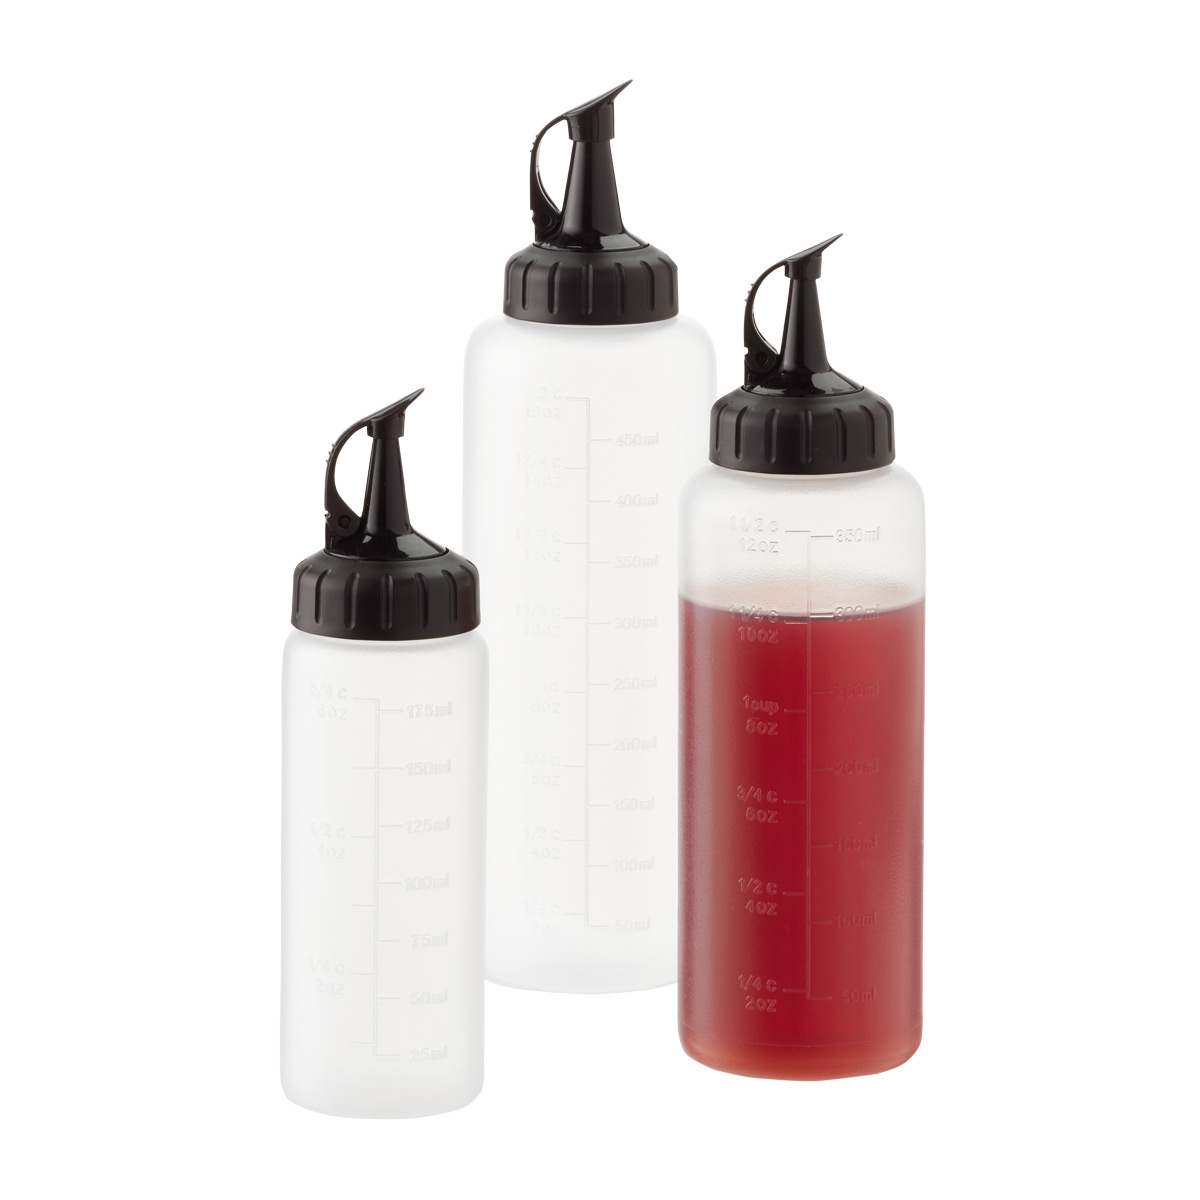 https://www.containerstore.com/catalogimages/330099/10073569g-chefs-squeeze-bottle.jpg